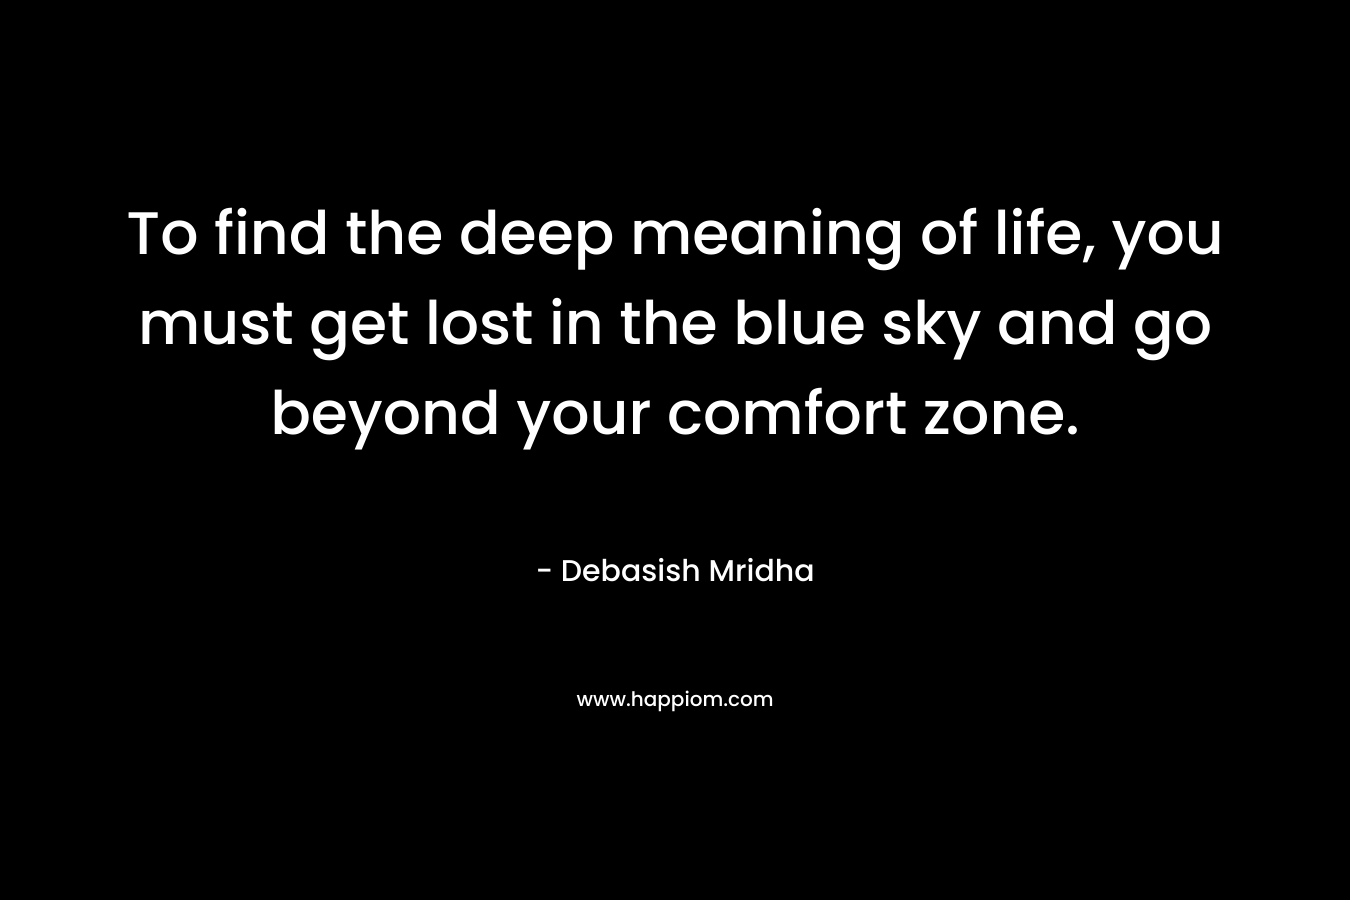 To find the deep meaning of life, you must get lost in the blue sky and go beyond your comfort zone.